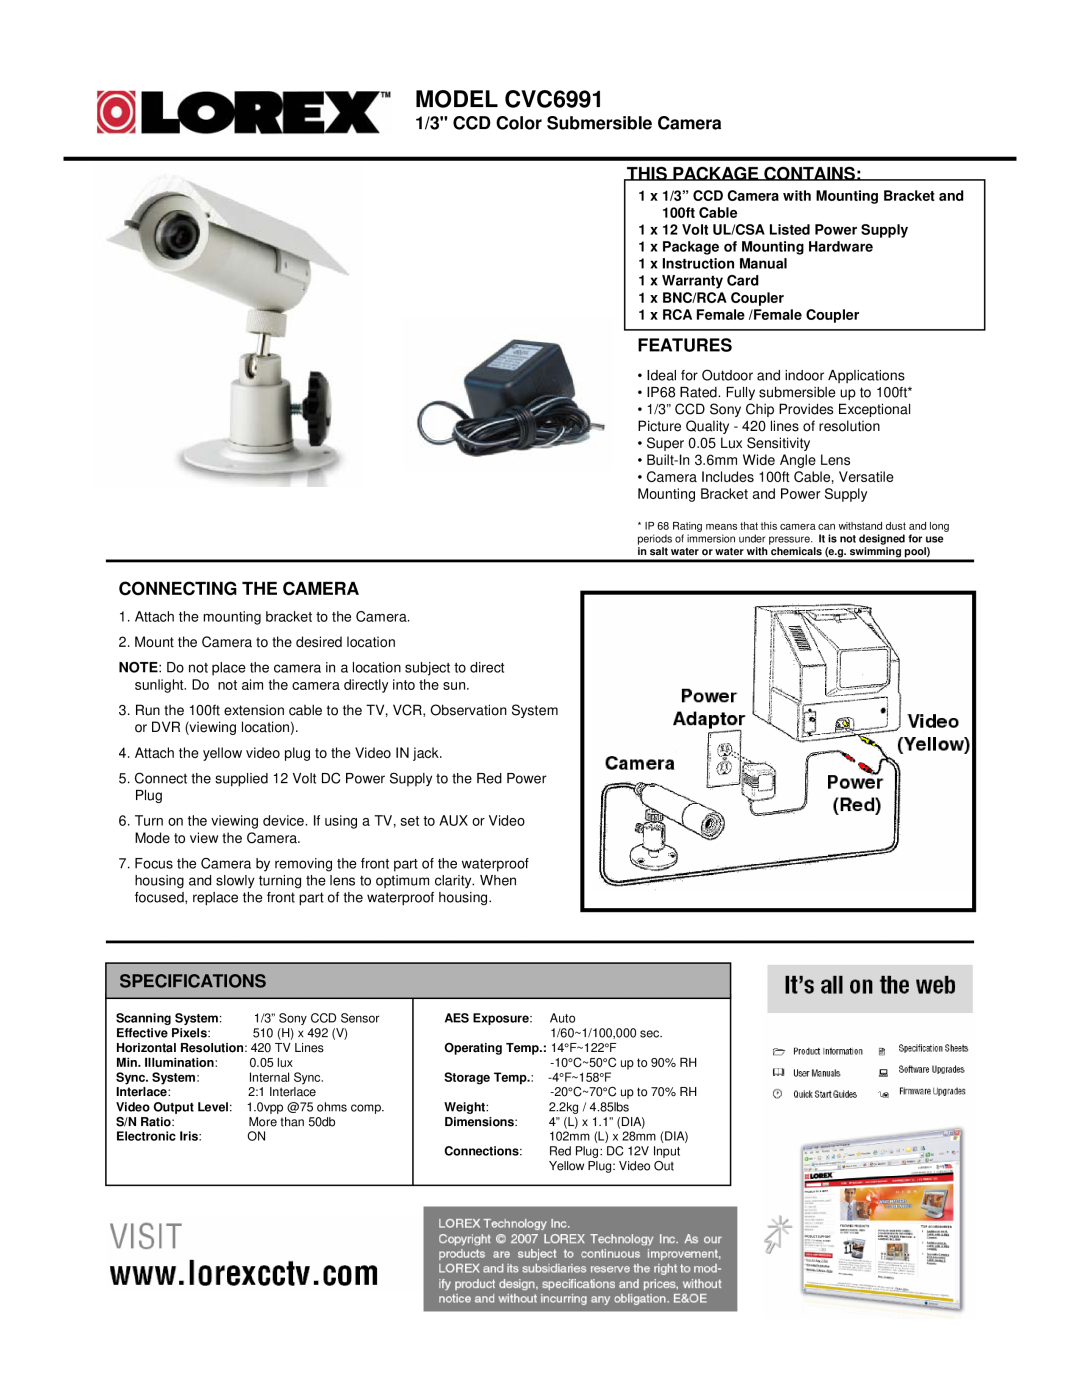 LOREX Technology CVA6991 specifications MODEL CVC6991, 1/3 CCD Color Submersible Camera, This Package Contains, Features 